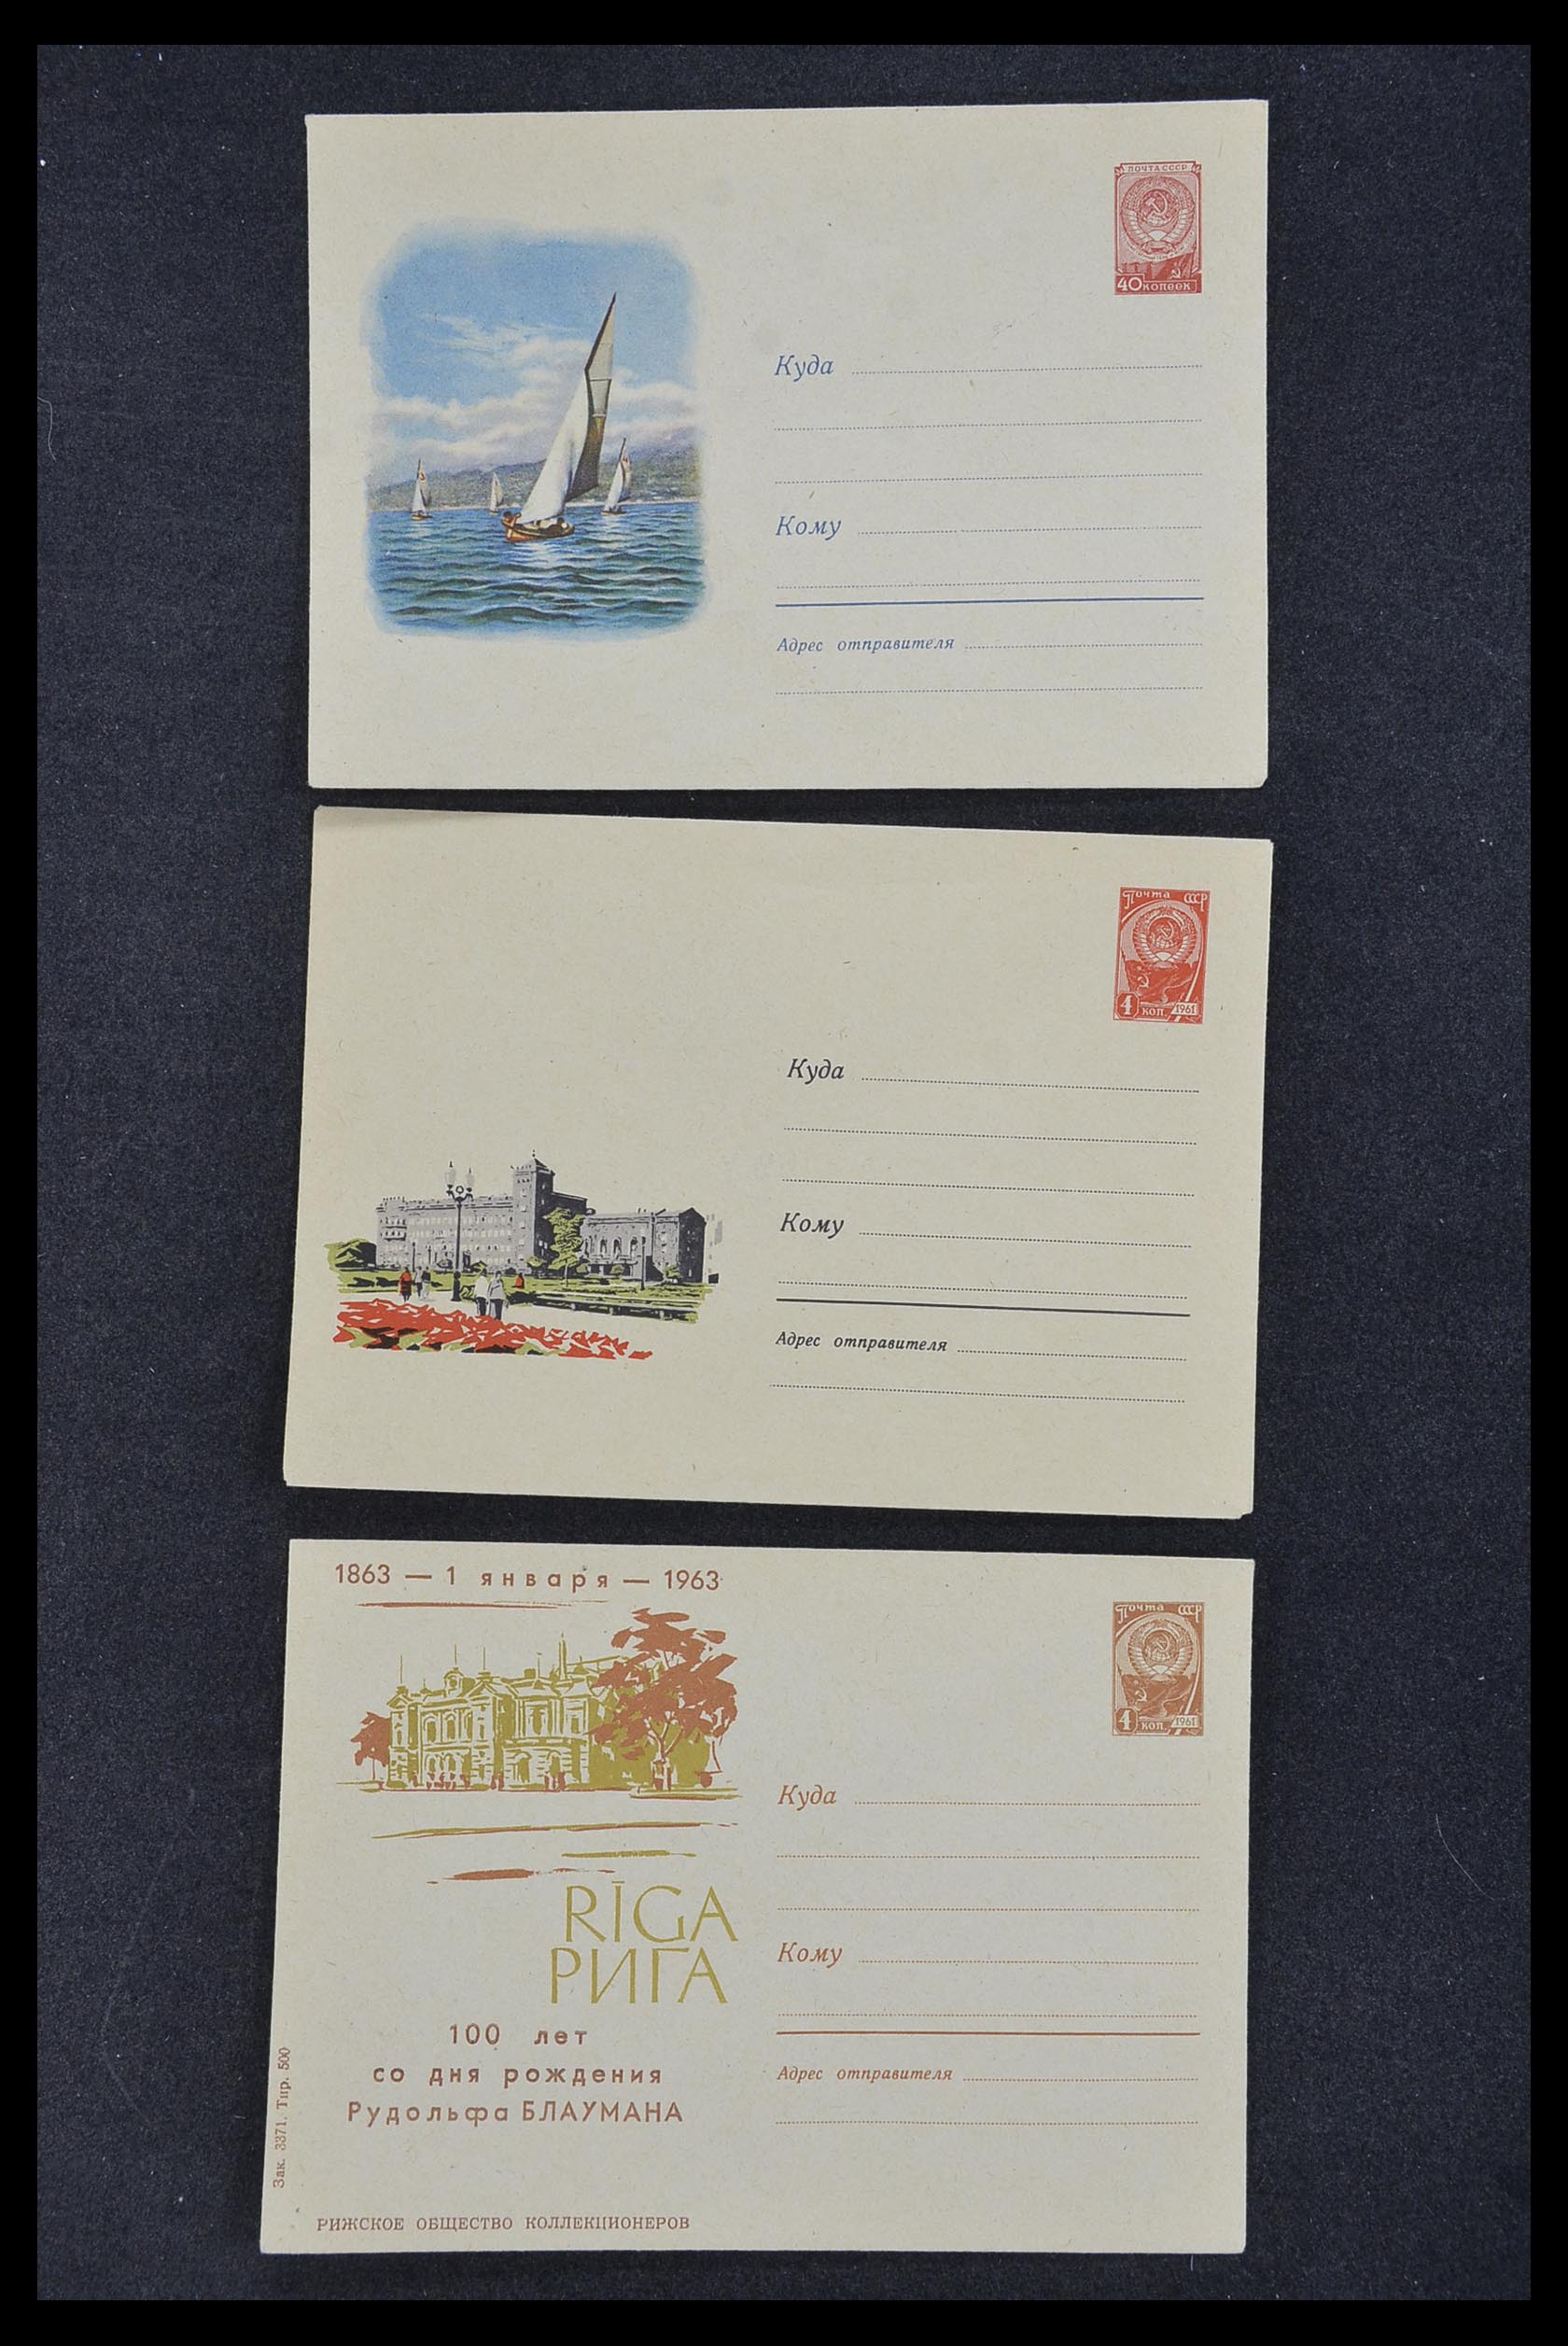 33932 033 - Stamp collection 33932 Russia postal stationeries 1953-1967.